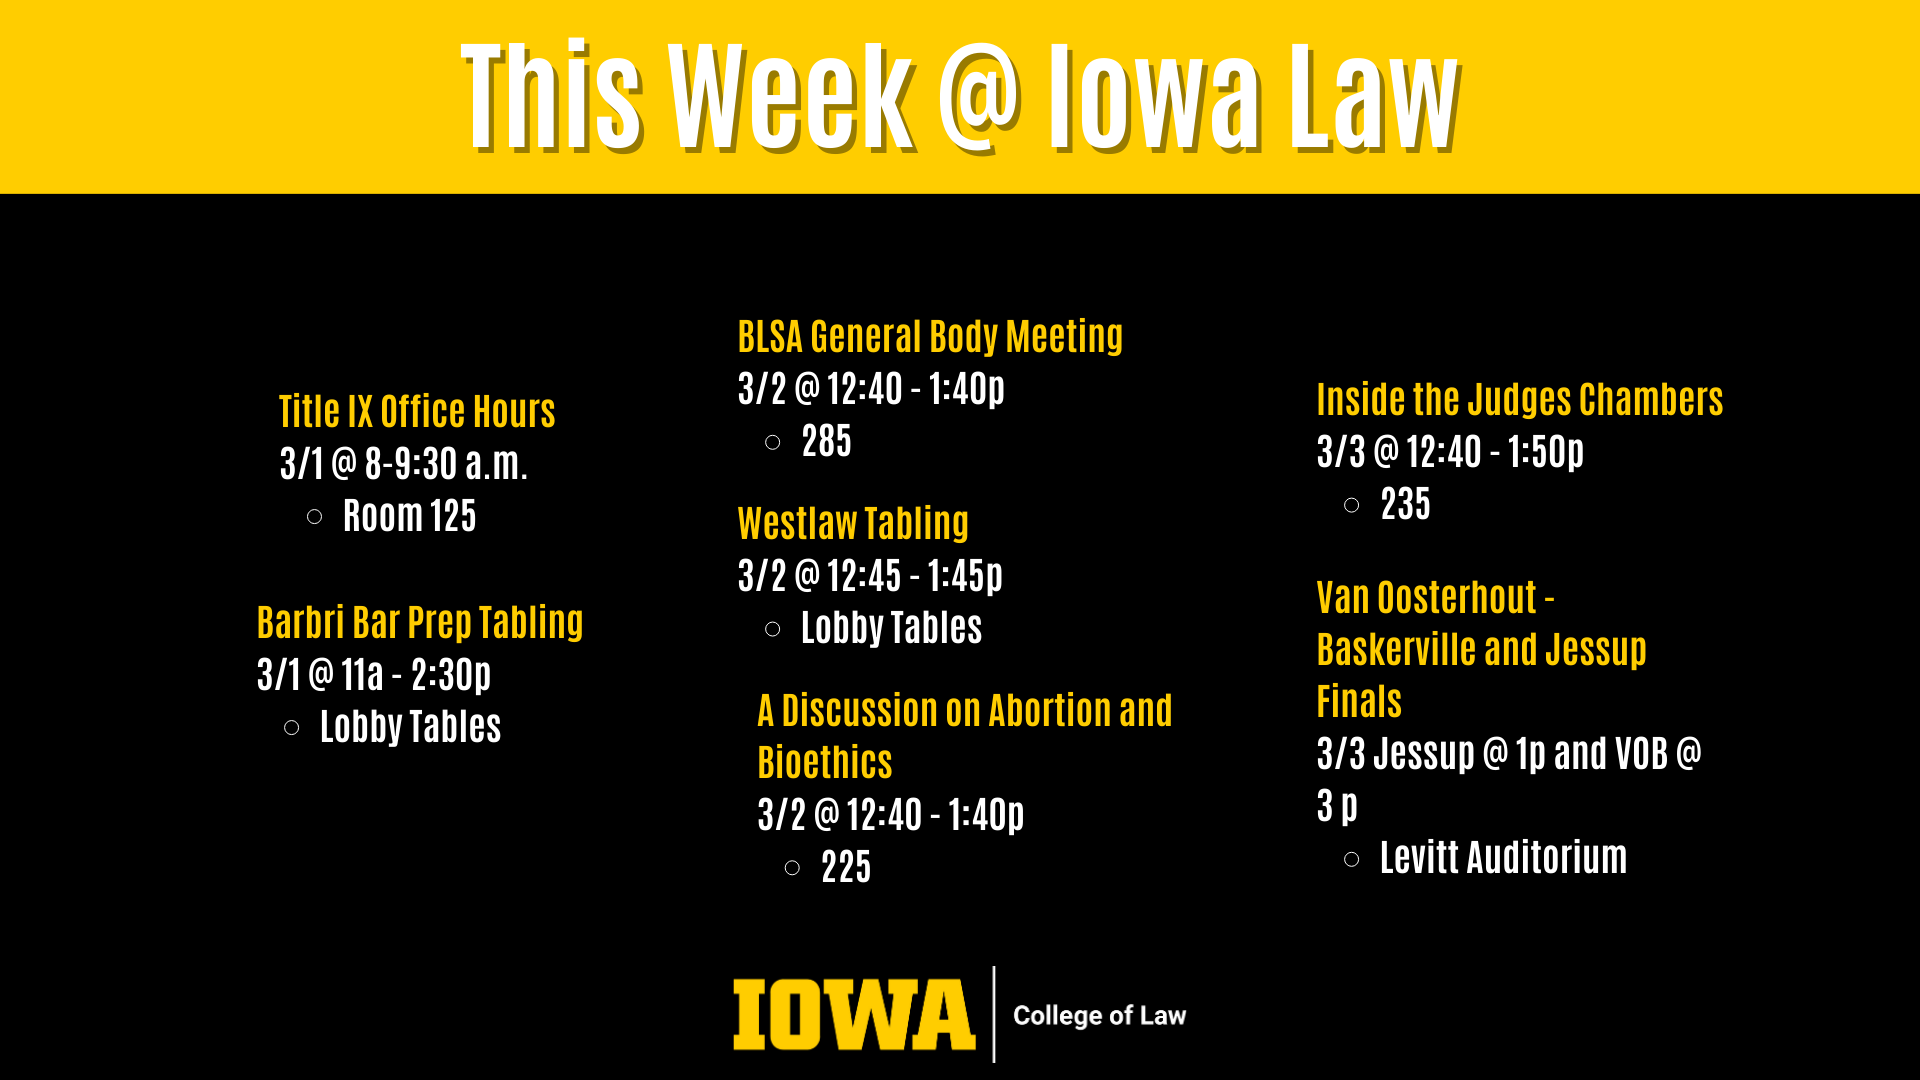 This Week @ Iowa Law Westlaw Tabling  3/2 @ 12:45 - 1:45p  Lobby Tables Barbri Bar Prep Tabling 3/1 @ 11a - 2:30p  Lobby Tables BLSA General Body Meeting 3/2 @ 12:40 - 1:40p  285 A Discussion on Abortion and Bioethics 3/2 @ 12:40 - 1:40p  225 Inside the Judges Chambers 3/3 @ 12:40 - 1:50p  235 Van Oosterhout - Baskerville and Jessup Finals 3/3 @ 1p Levitt Auditorium